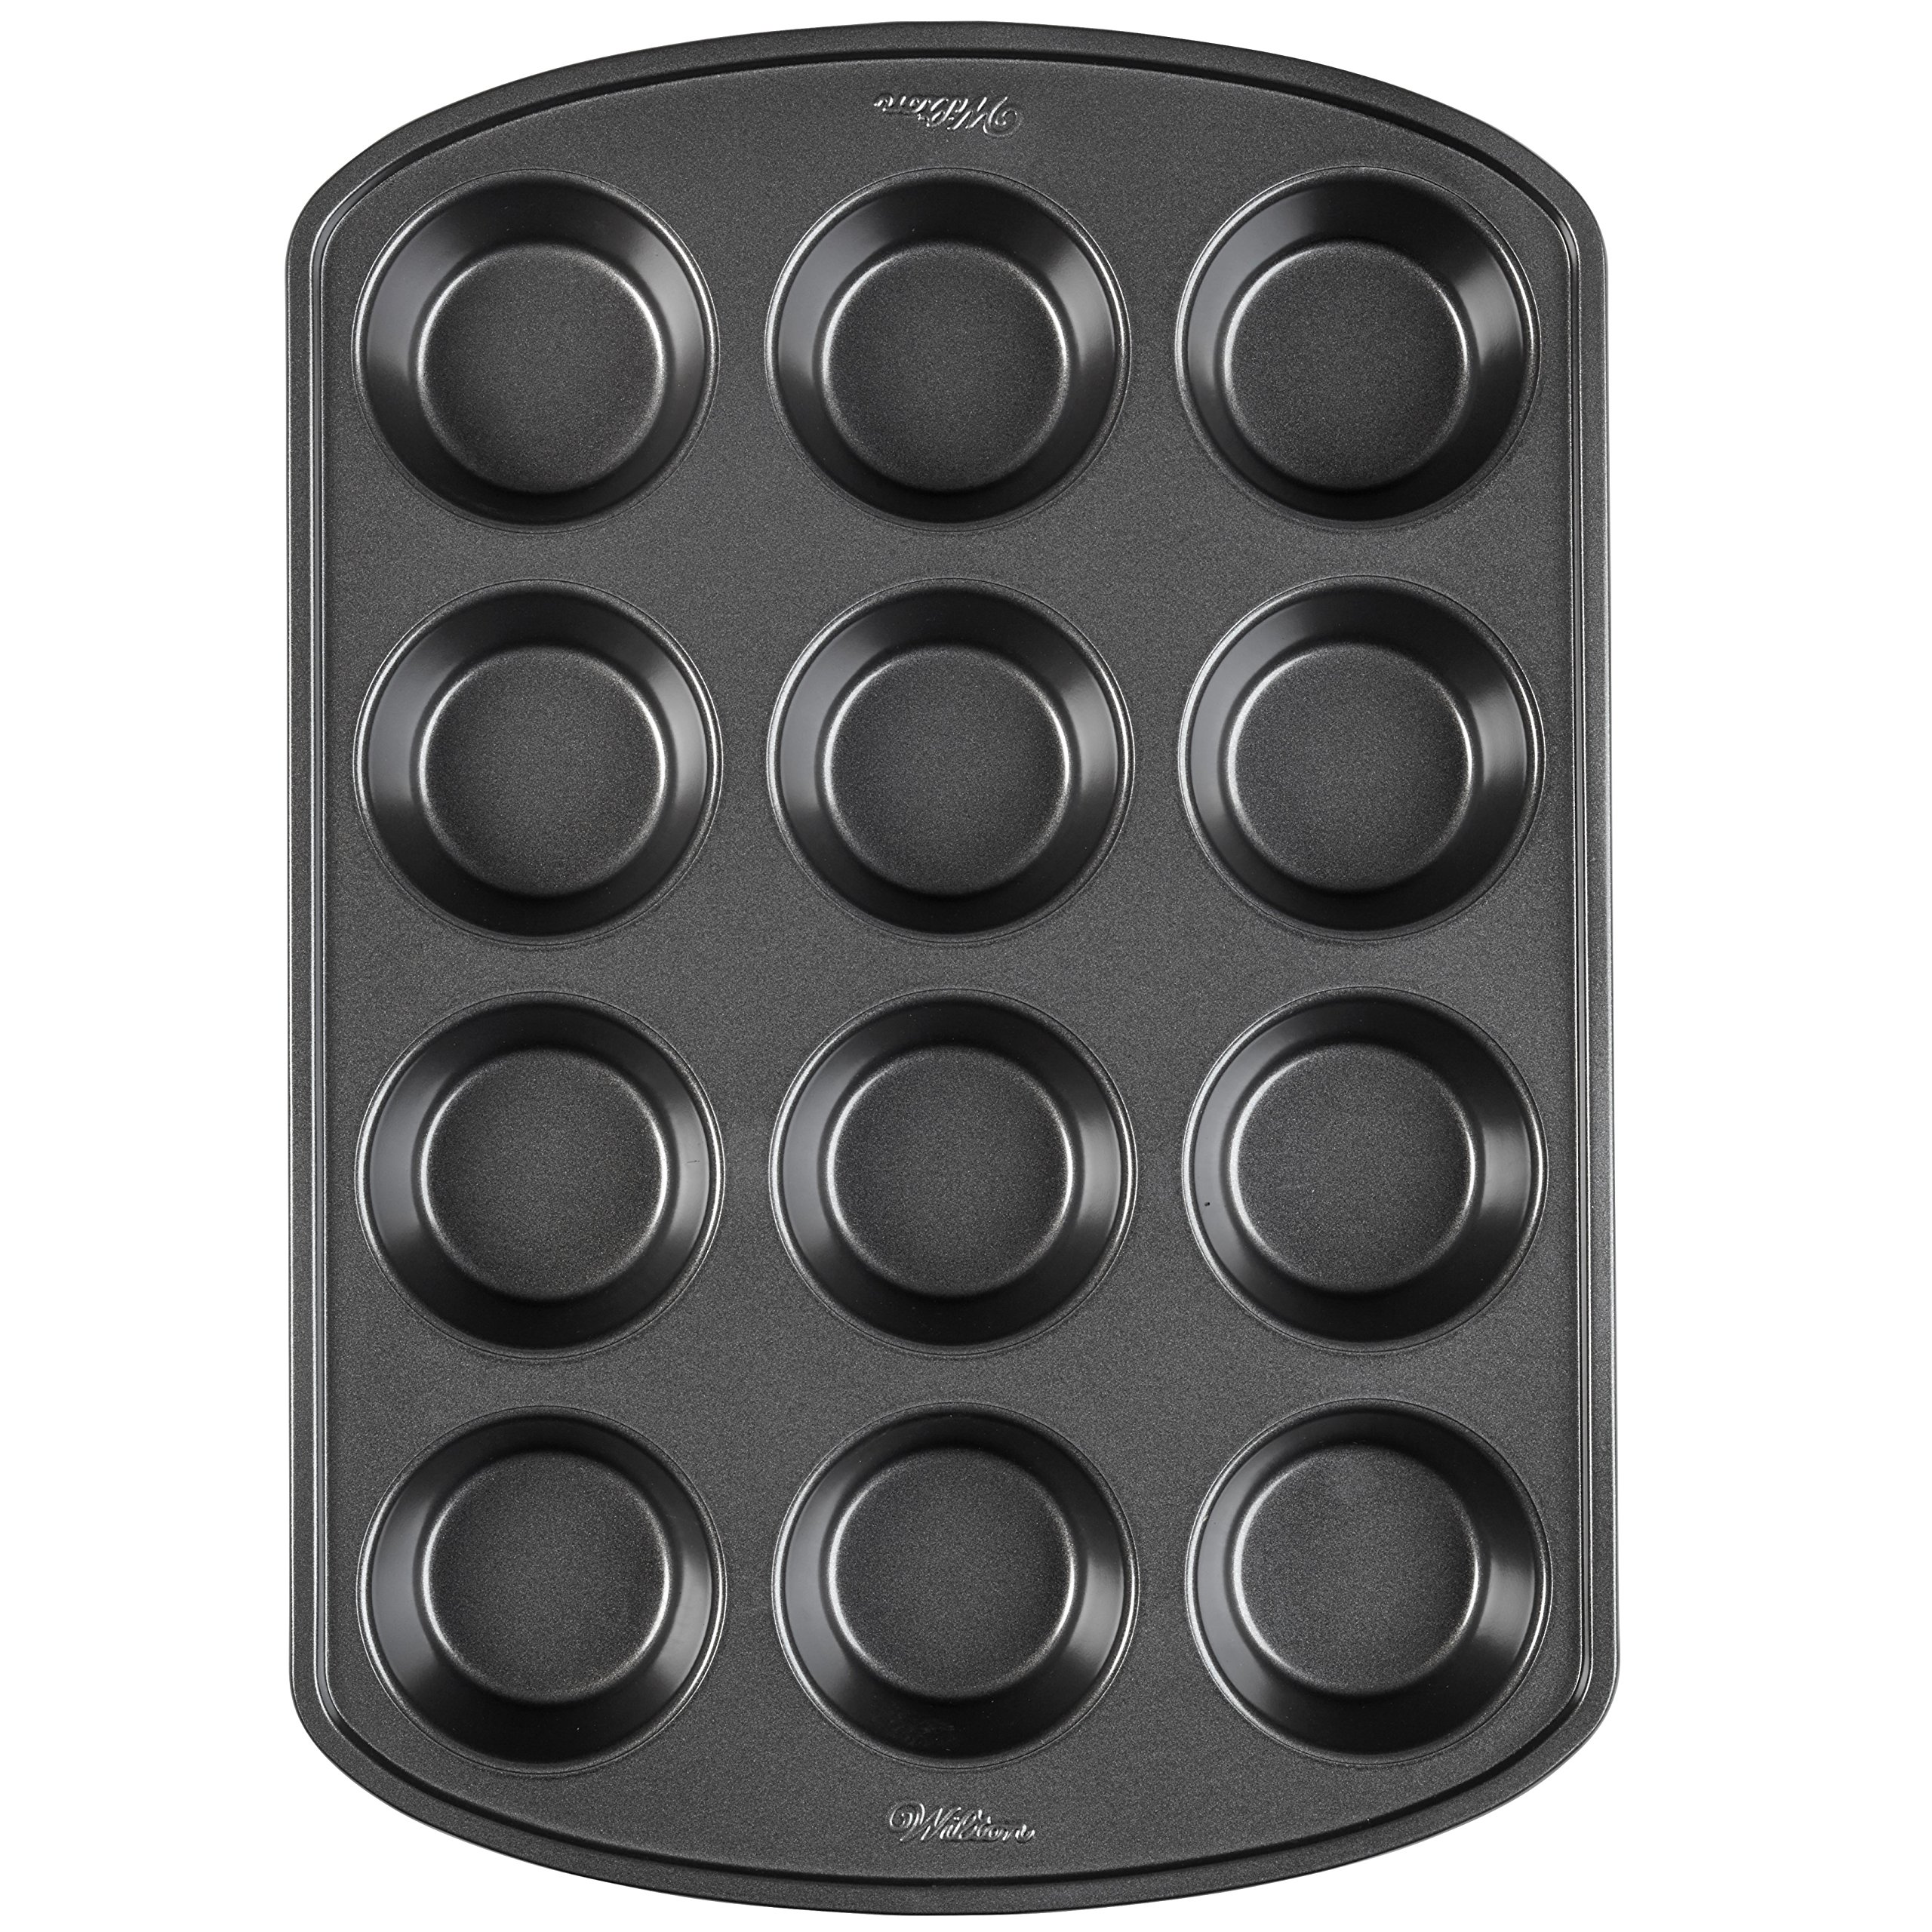 Wilton 14-inch Pizza Pan and 12-Cup Muffin Pan Bakeware Set